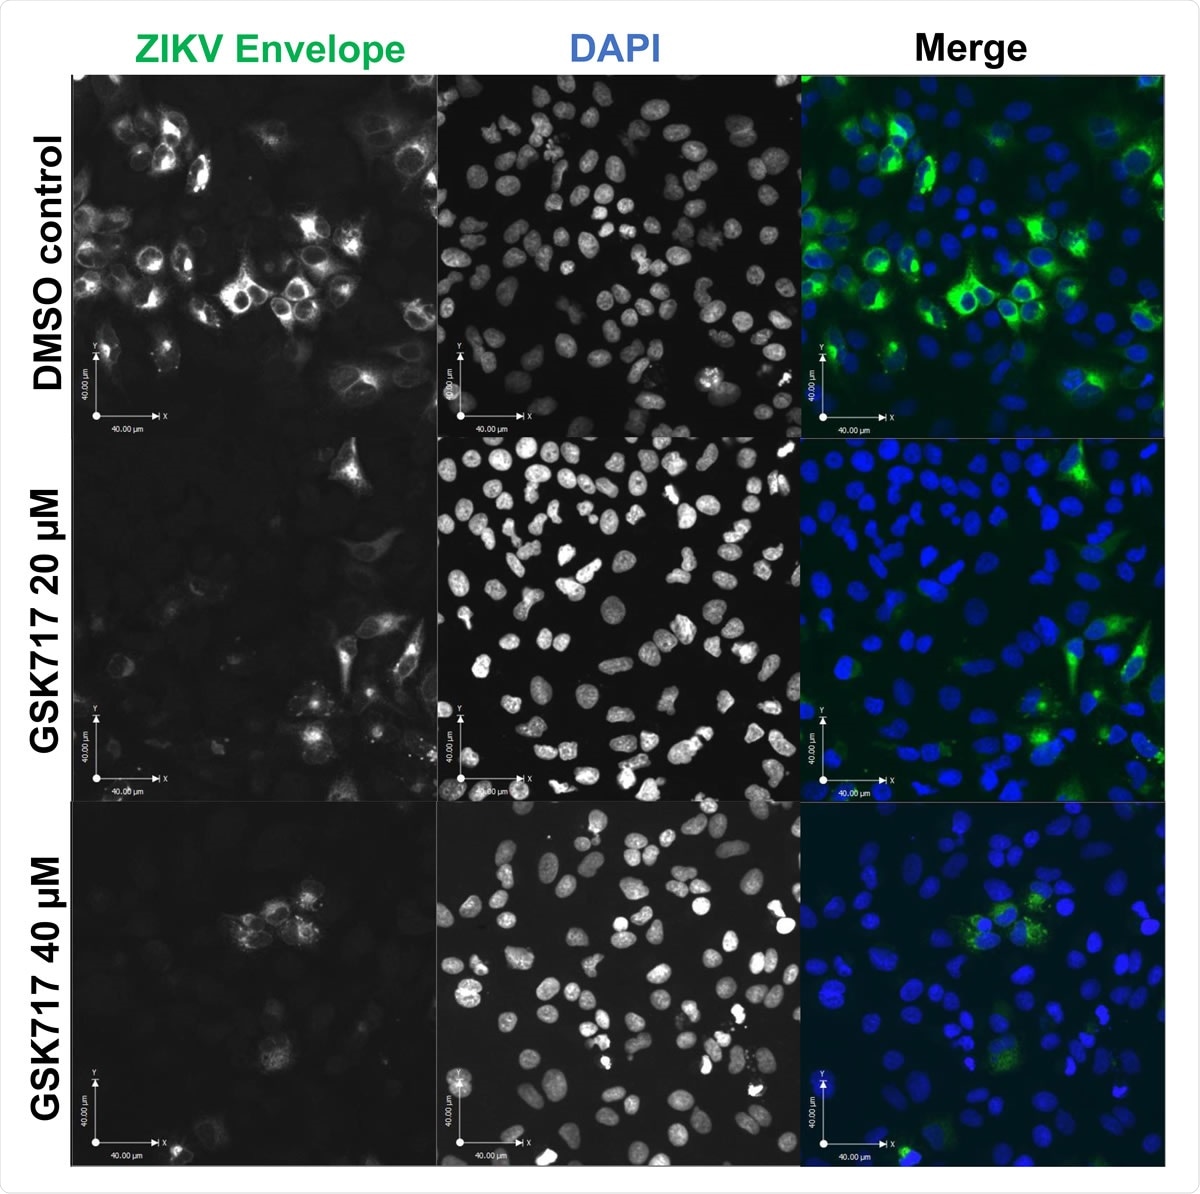 The anti-NOD2 drug GSK717 blocks the spread of ZIKV infection. (A) Representative confocal imaging (20X) showing antiviral effect of GSK717 at 20 µM and 40 µM. A549 cells were infected with ZIKV (MOI=1) followed by treatment with DMSO or GSK717 at 20 or 40 µM for 48 hours before processing for indirect immunofluorescence. ZIKV-infected cells were identified using a mouse monoclonal antibody (4G2) to envelope protein and Alexa Fluor 488 donkey anti-mouse to detect the primary antibody. Nuclei were stained with DAPI. Images were acquired using a spinning disk confocal microscope equipped with Volocity 6.2.1 software.